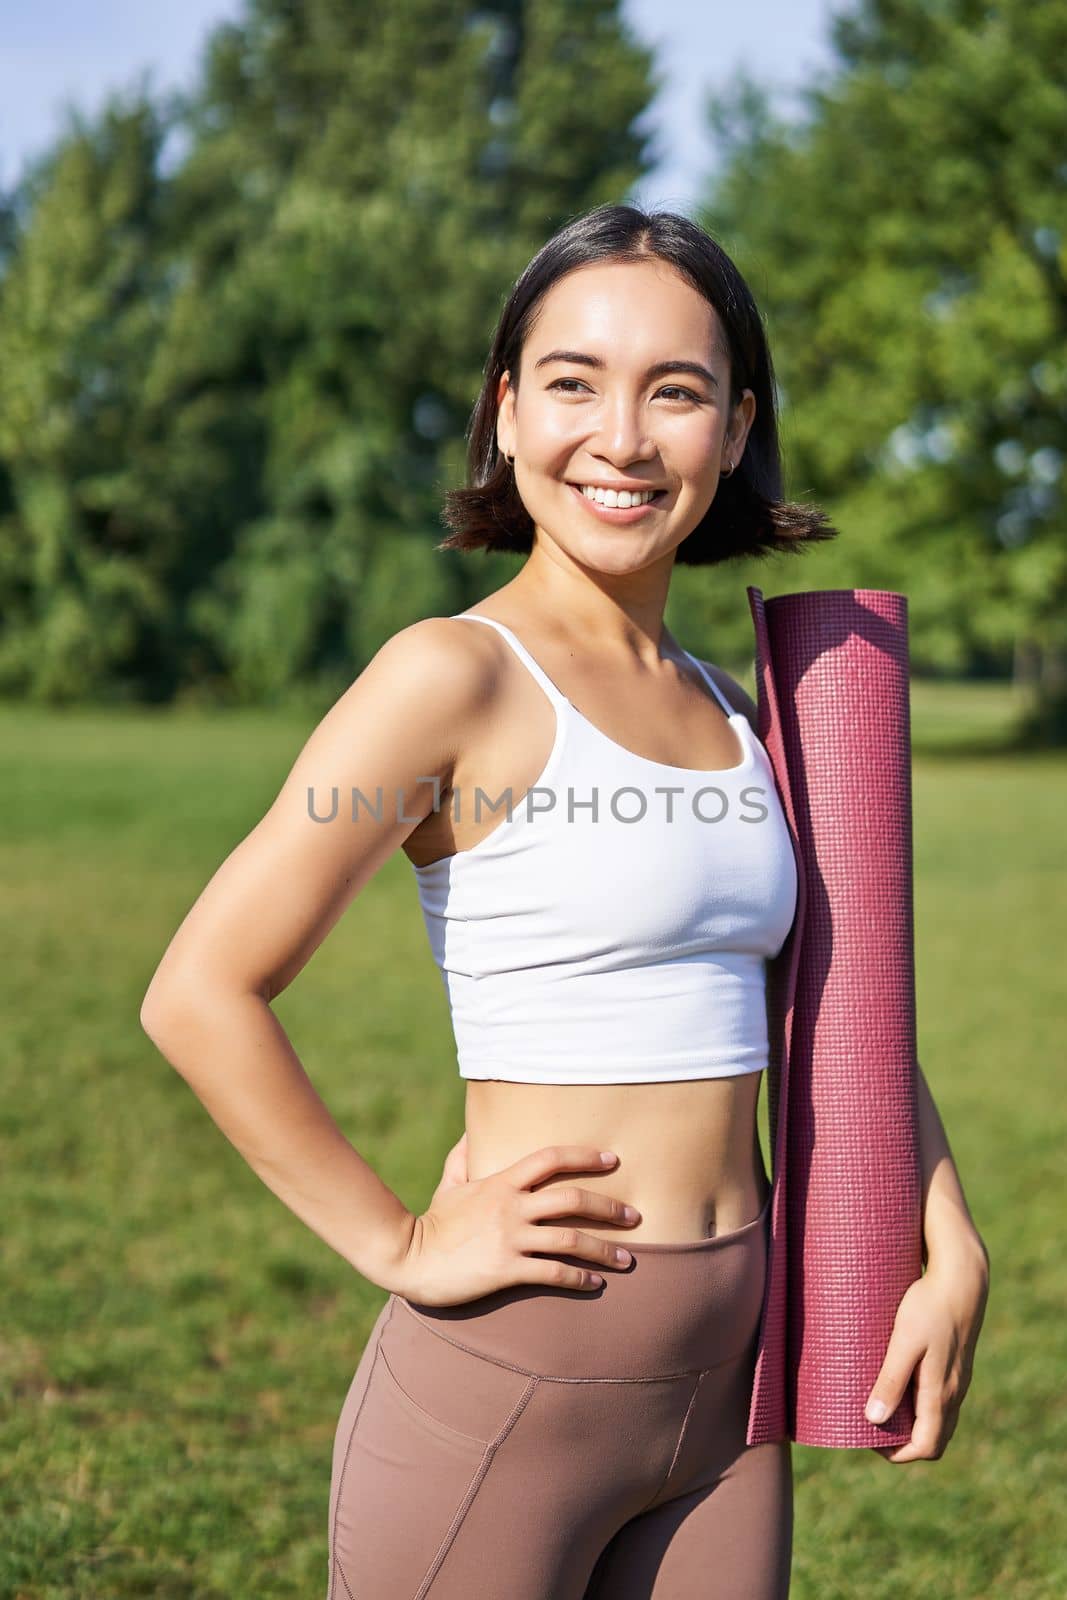 Smiling fitness girl with rubber mat, stands in park wearing uniform for workout and sport activities, does yoga outdoors on lawn.